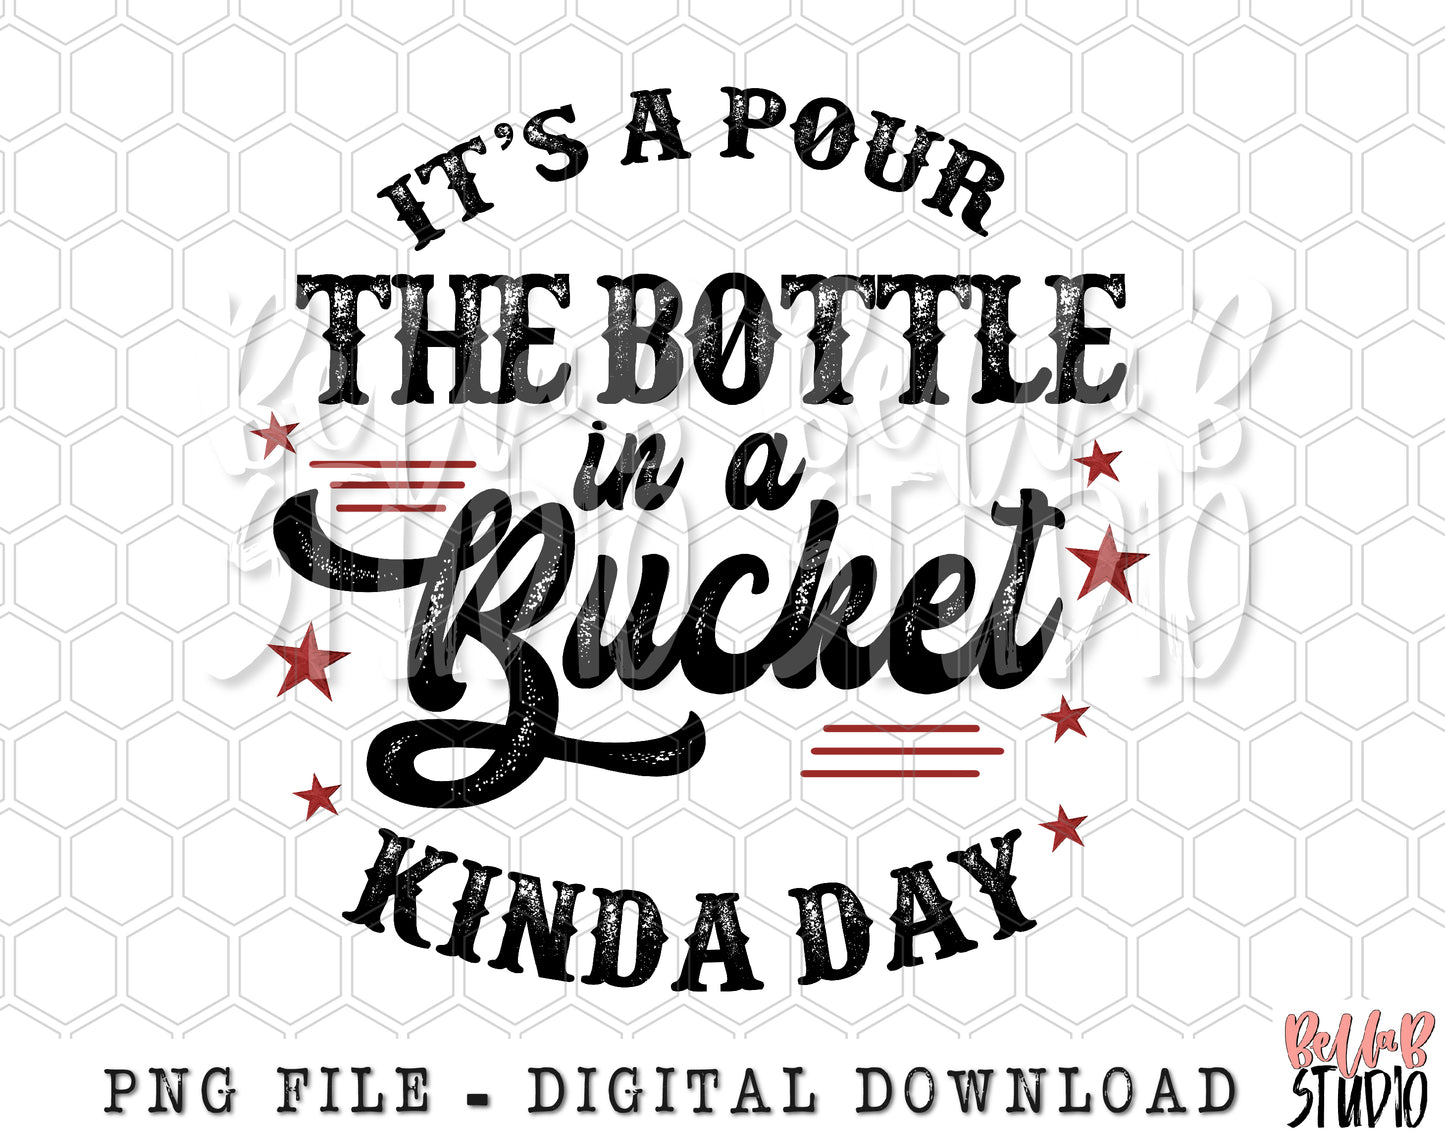 It's A Pour The Bottle In A Bucket Kinda Day PNG Sublimation Design